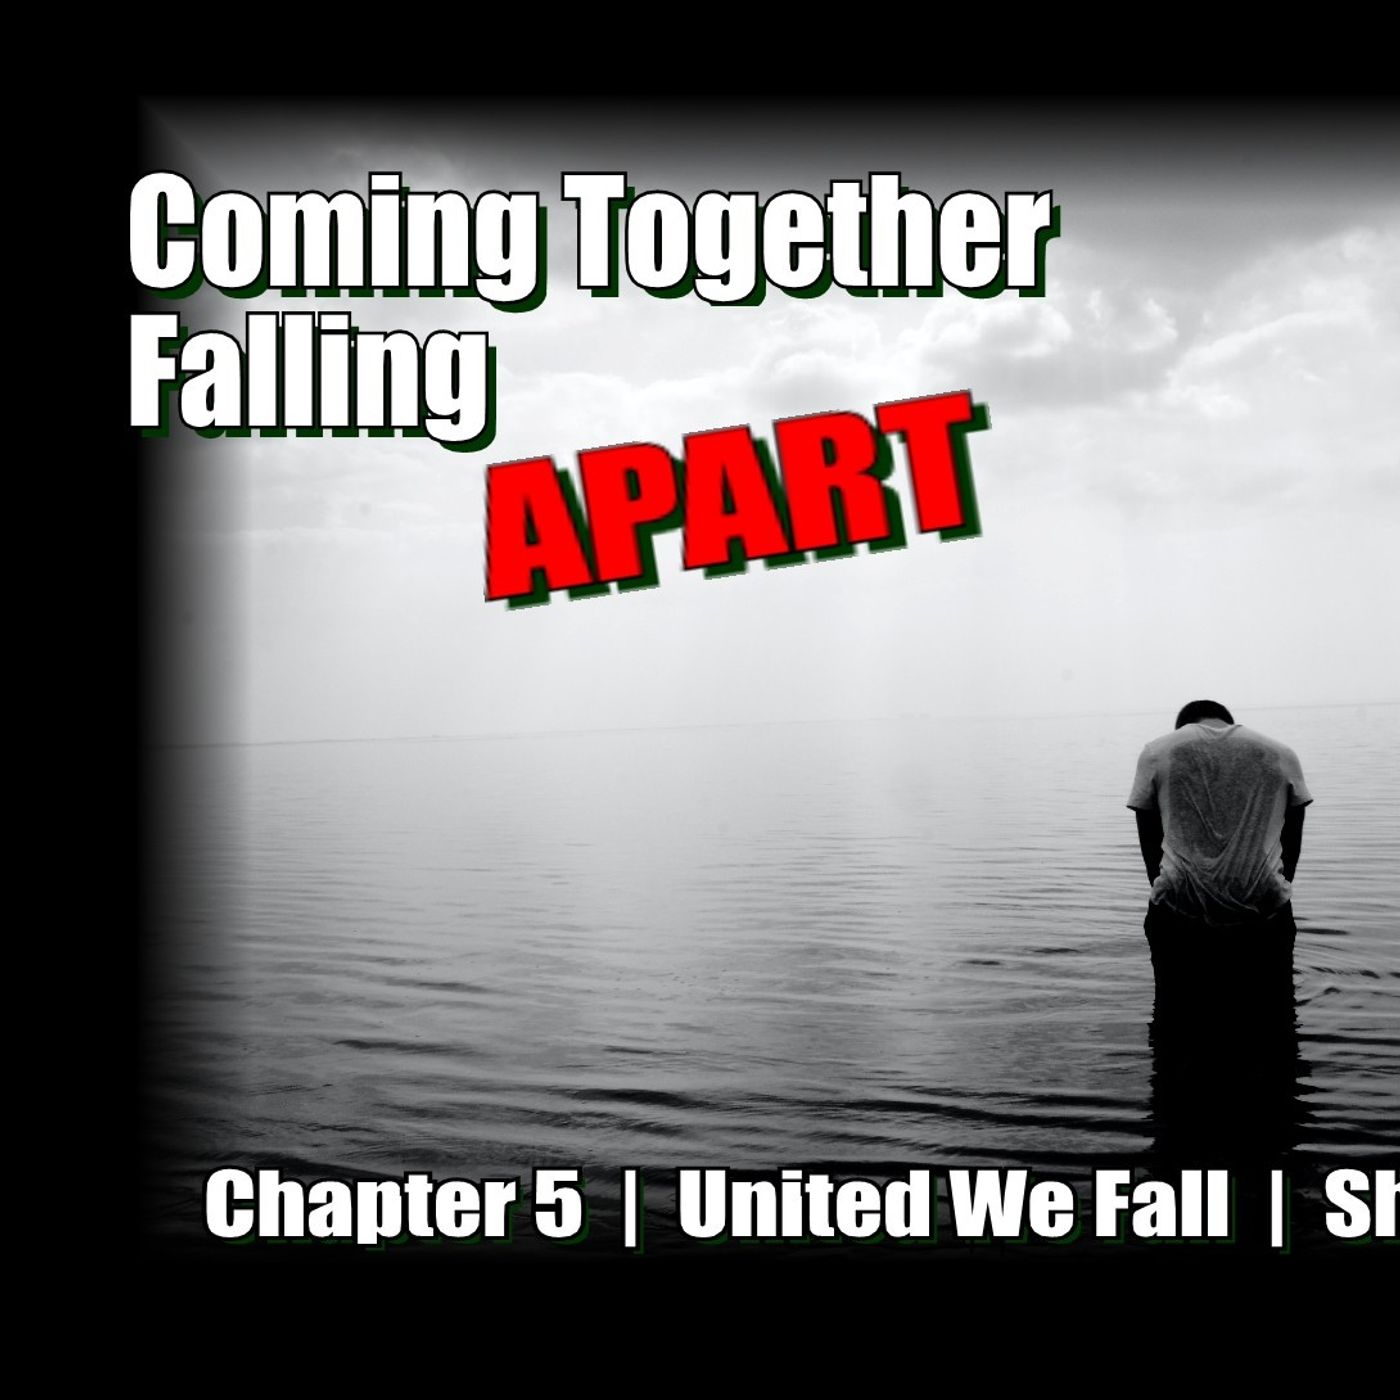 United We Fall - Chapter 5 - Coming Together and Falling Apart